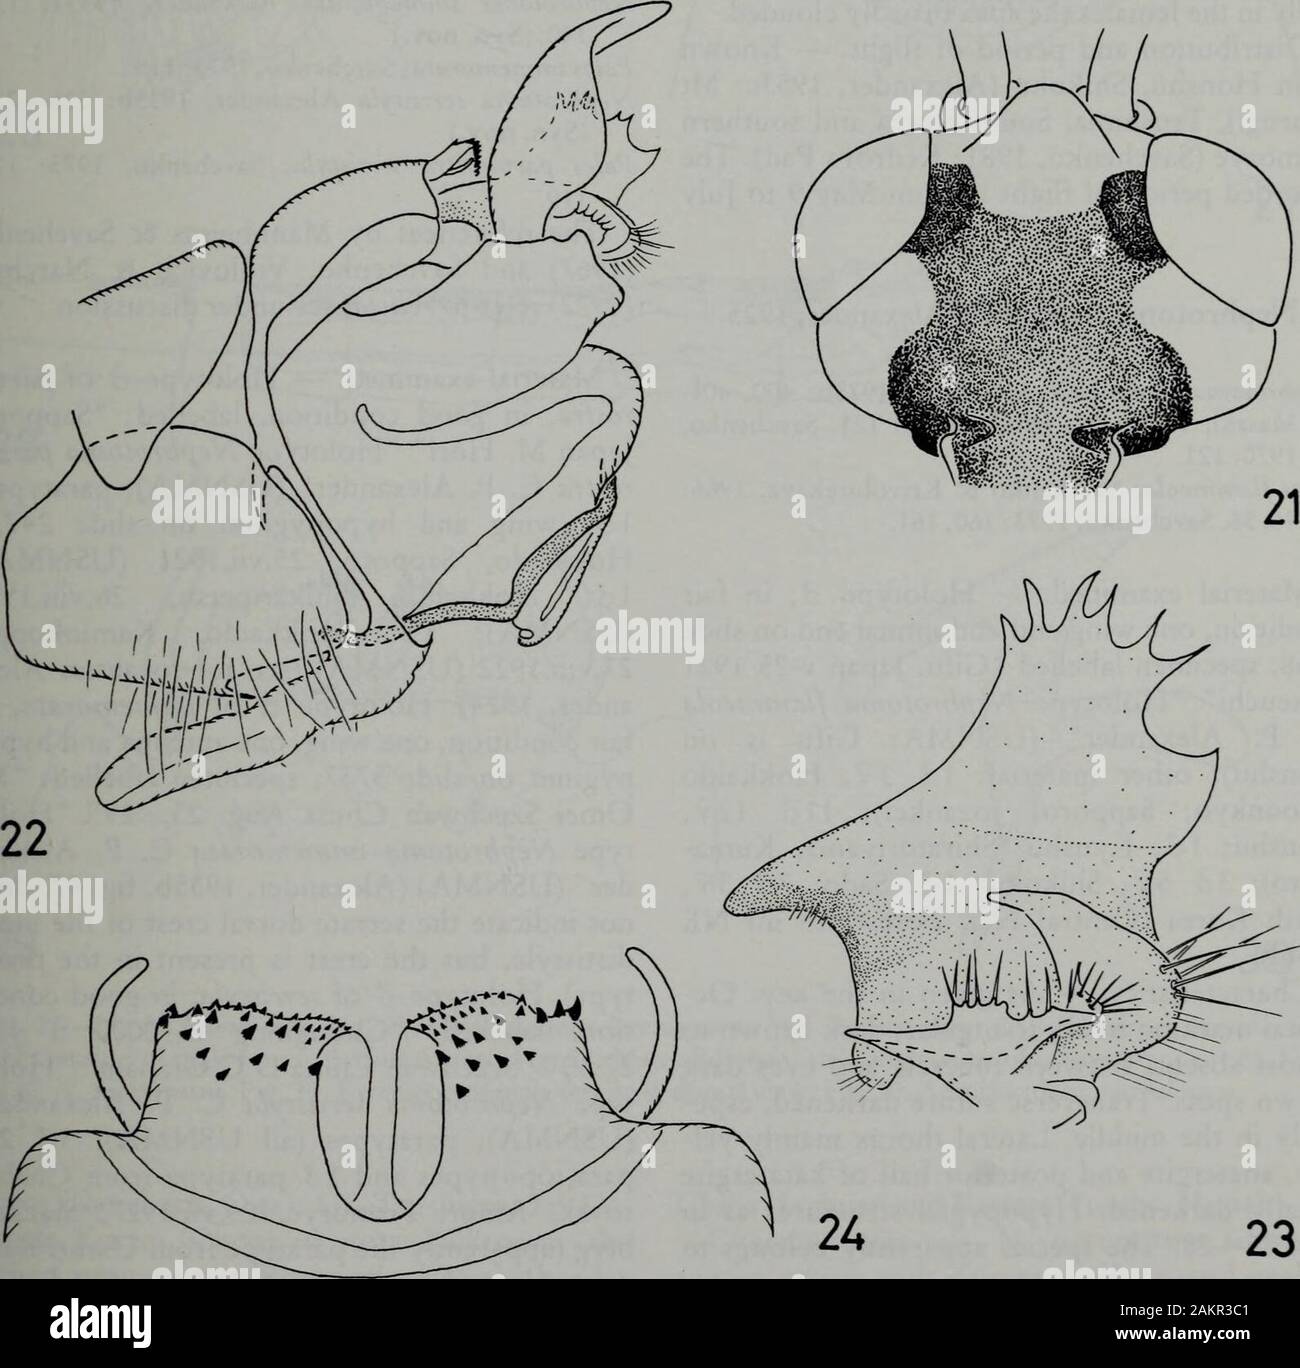 Tijdschrift voor entomologie . do; 19, Shikoku (Betssiyama,Ehime); 26 29, Kyushu (Shiratoriyama, Ku-mamoto; Chojabaru, Oita). Characteristics. — N. subpallida can easily berecognized by the characters mentioned in thekey. The female cerei are relatively broad andshort (fig. 17). The male intromittent organ hasthe apical two-thirds trifid, a character knownfrom the flavescens subgroup of the cornicinagroup only (Oosterbroek, 1980). Distribution and period of flight. — The spe-cies was known from Honshu only, but materialwas examined now from Sado, Shikoku andKyushu as well. Adults were collecte Stock Photo